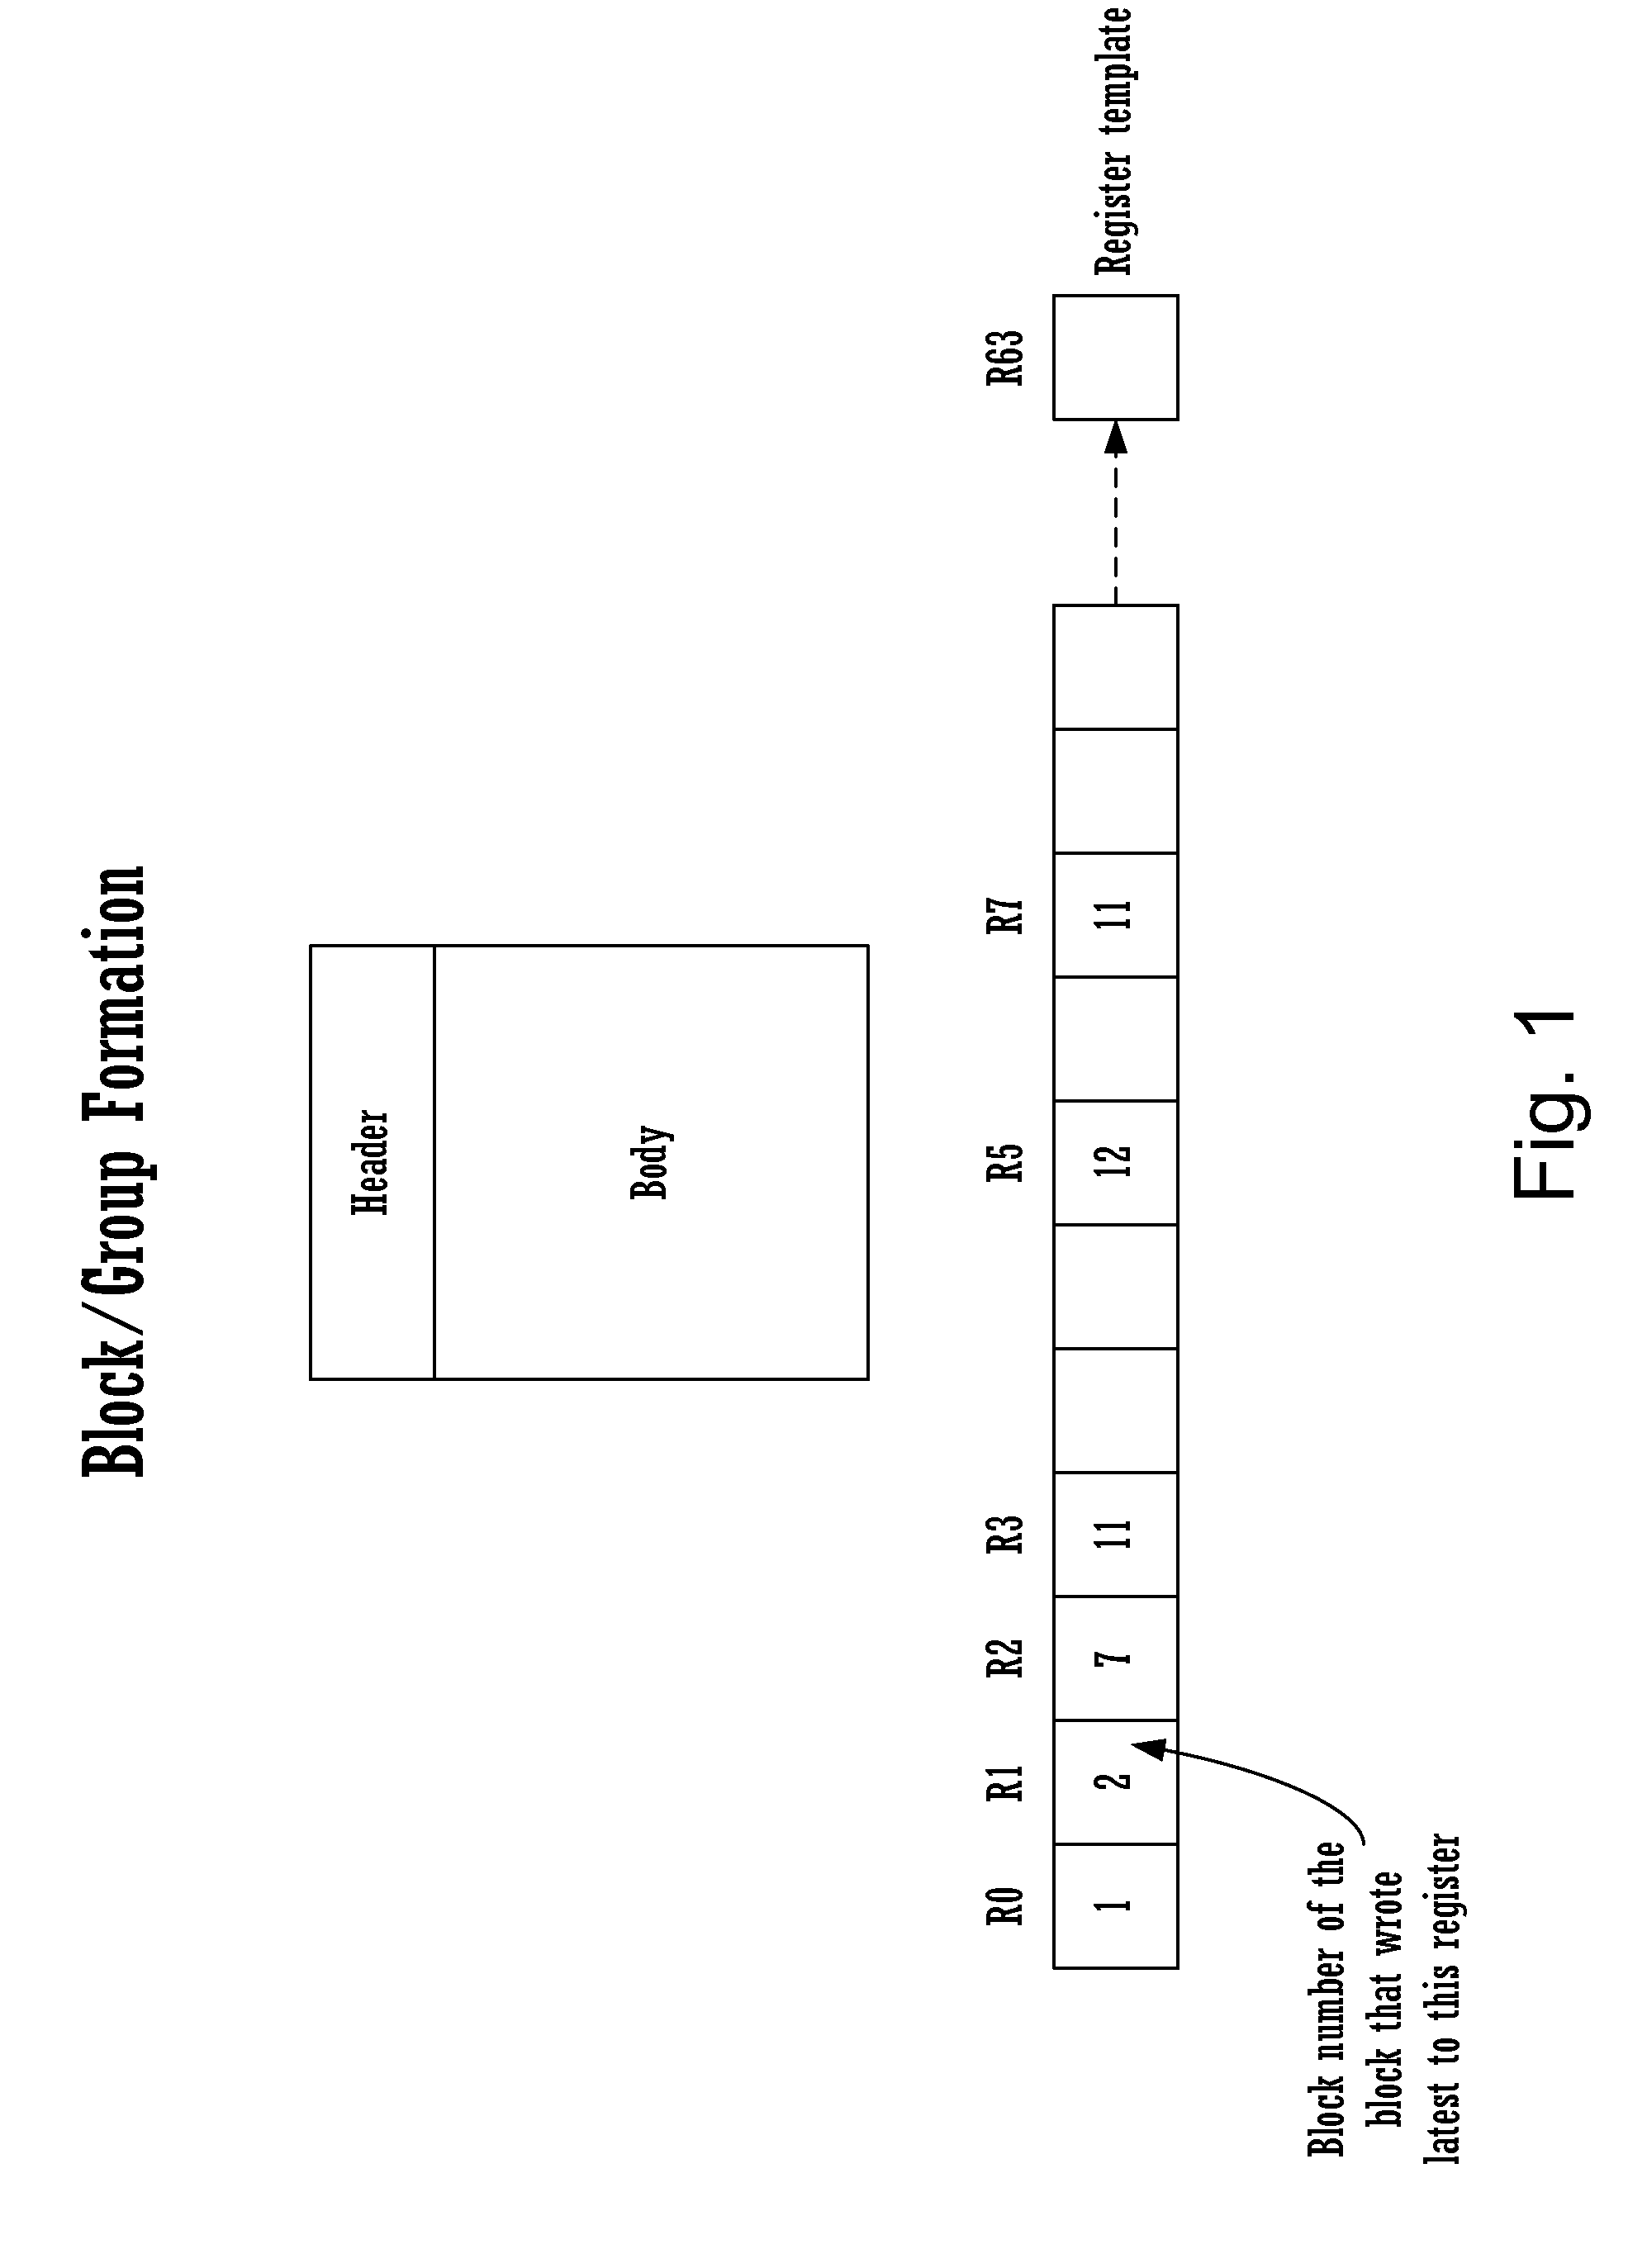 Method for executing blocks of instructions using a microprocessor architecture having a register view, source view, instruction view, and a plurality of register templates